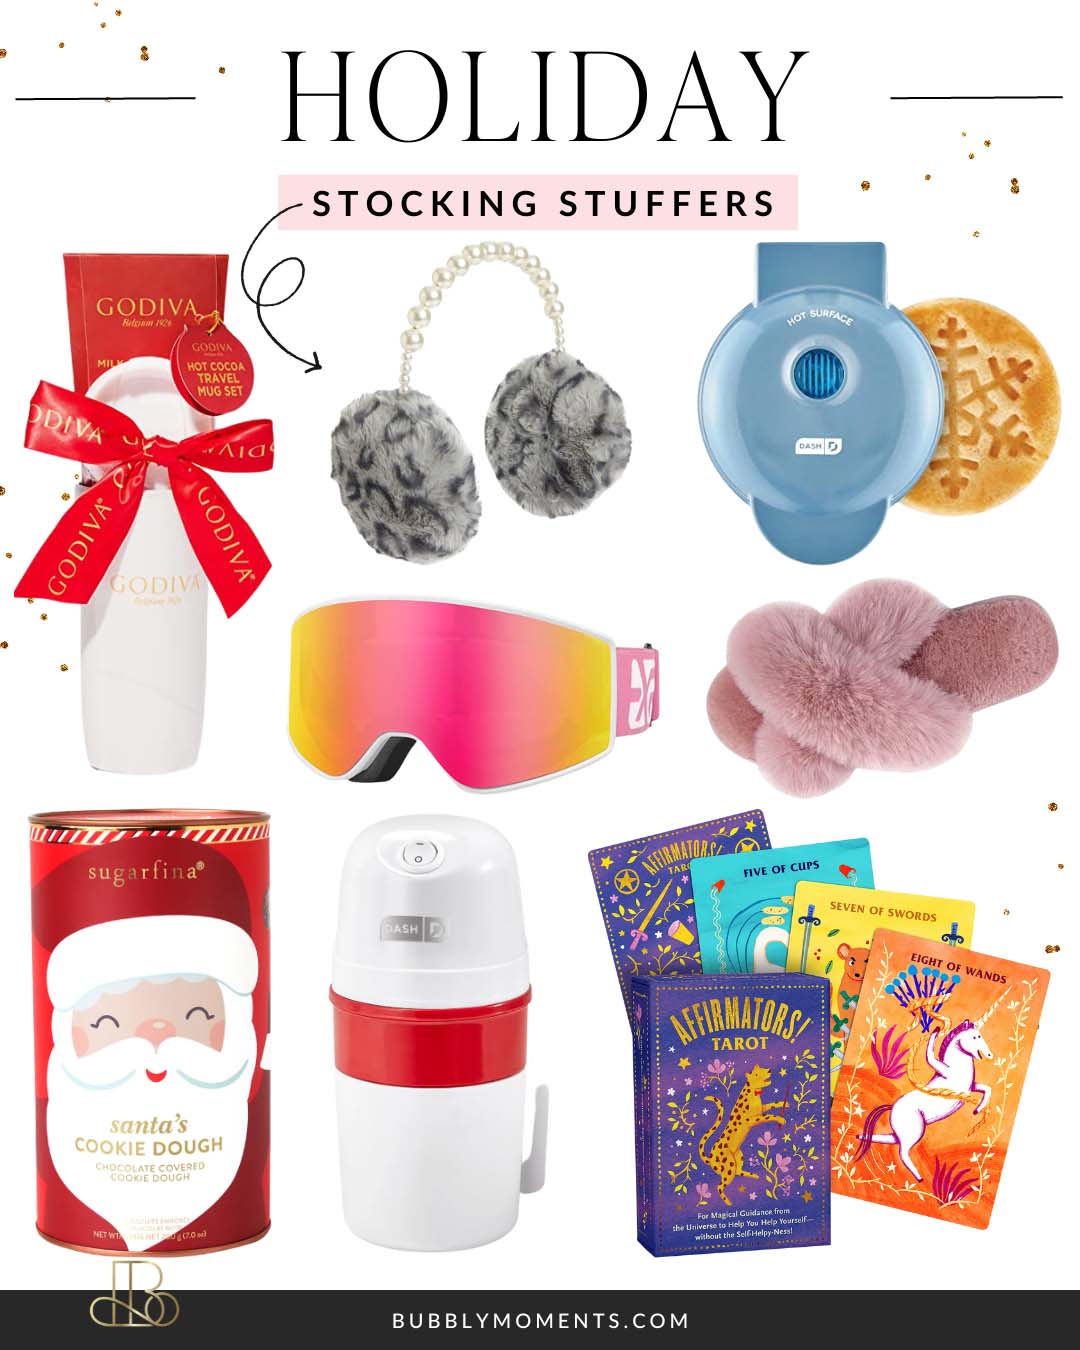 19 Stocking Stuffers Under $25 For The Entire Family